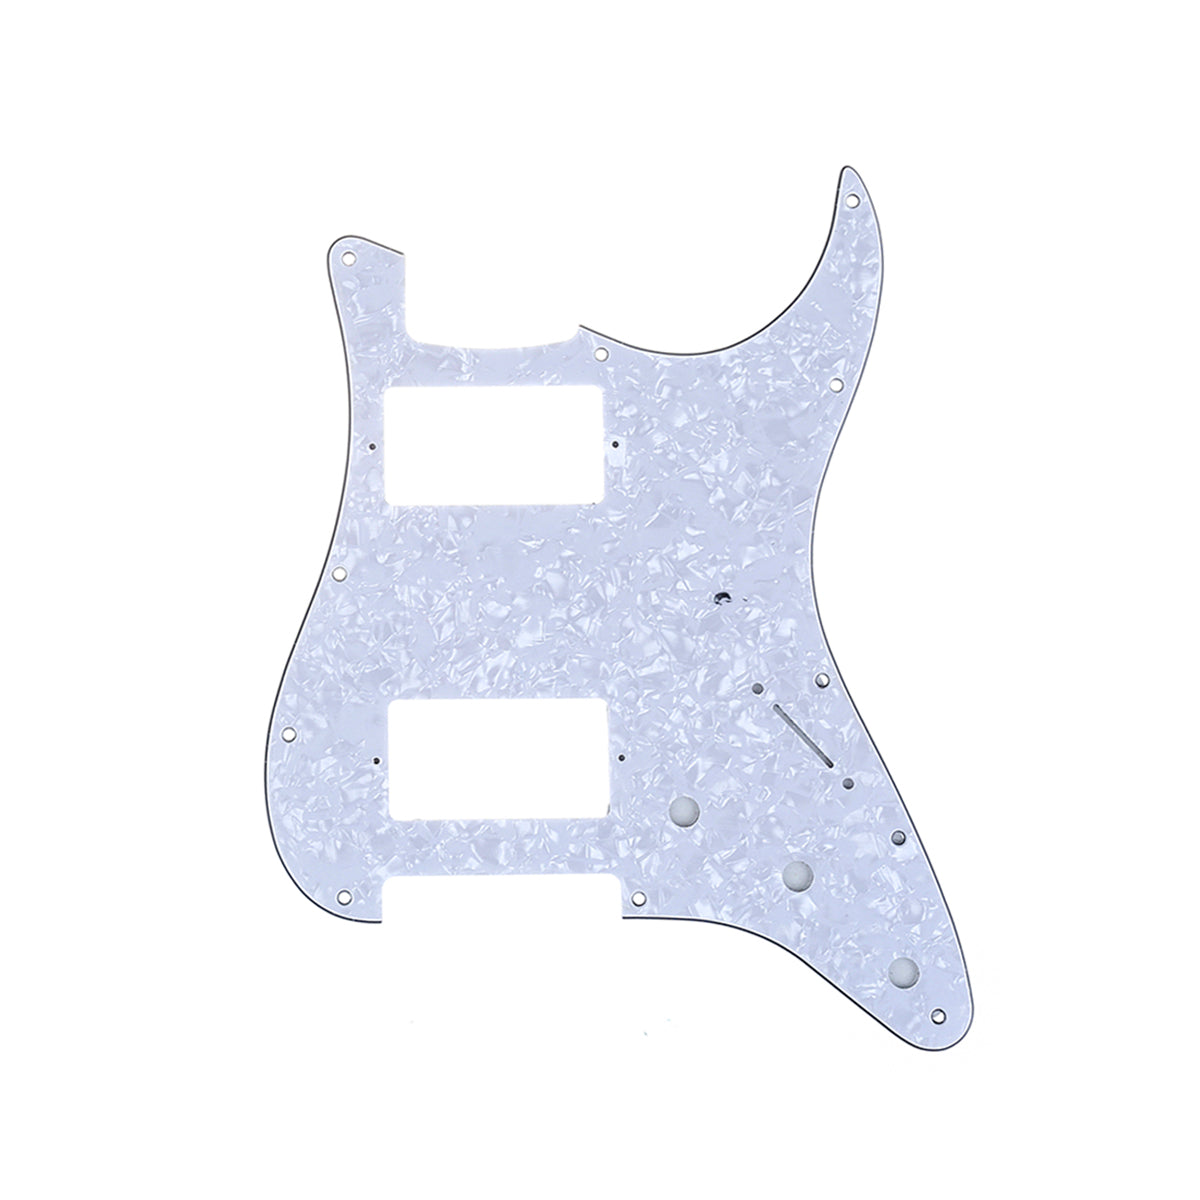 Musiclily Pro 11 Hole Guitar Strat Pickguard HH for American/Mexican Fender Standard Stratocaster Modern Style, 4Ply White Pearl